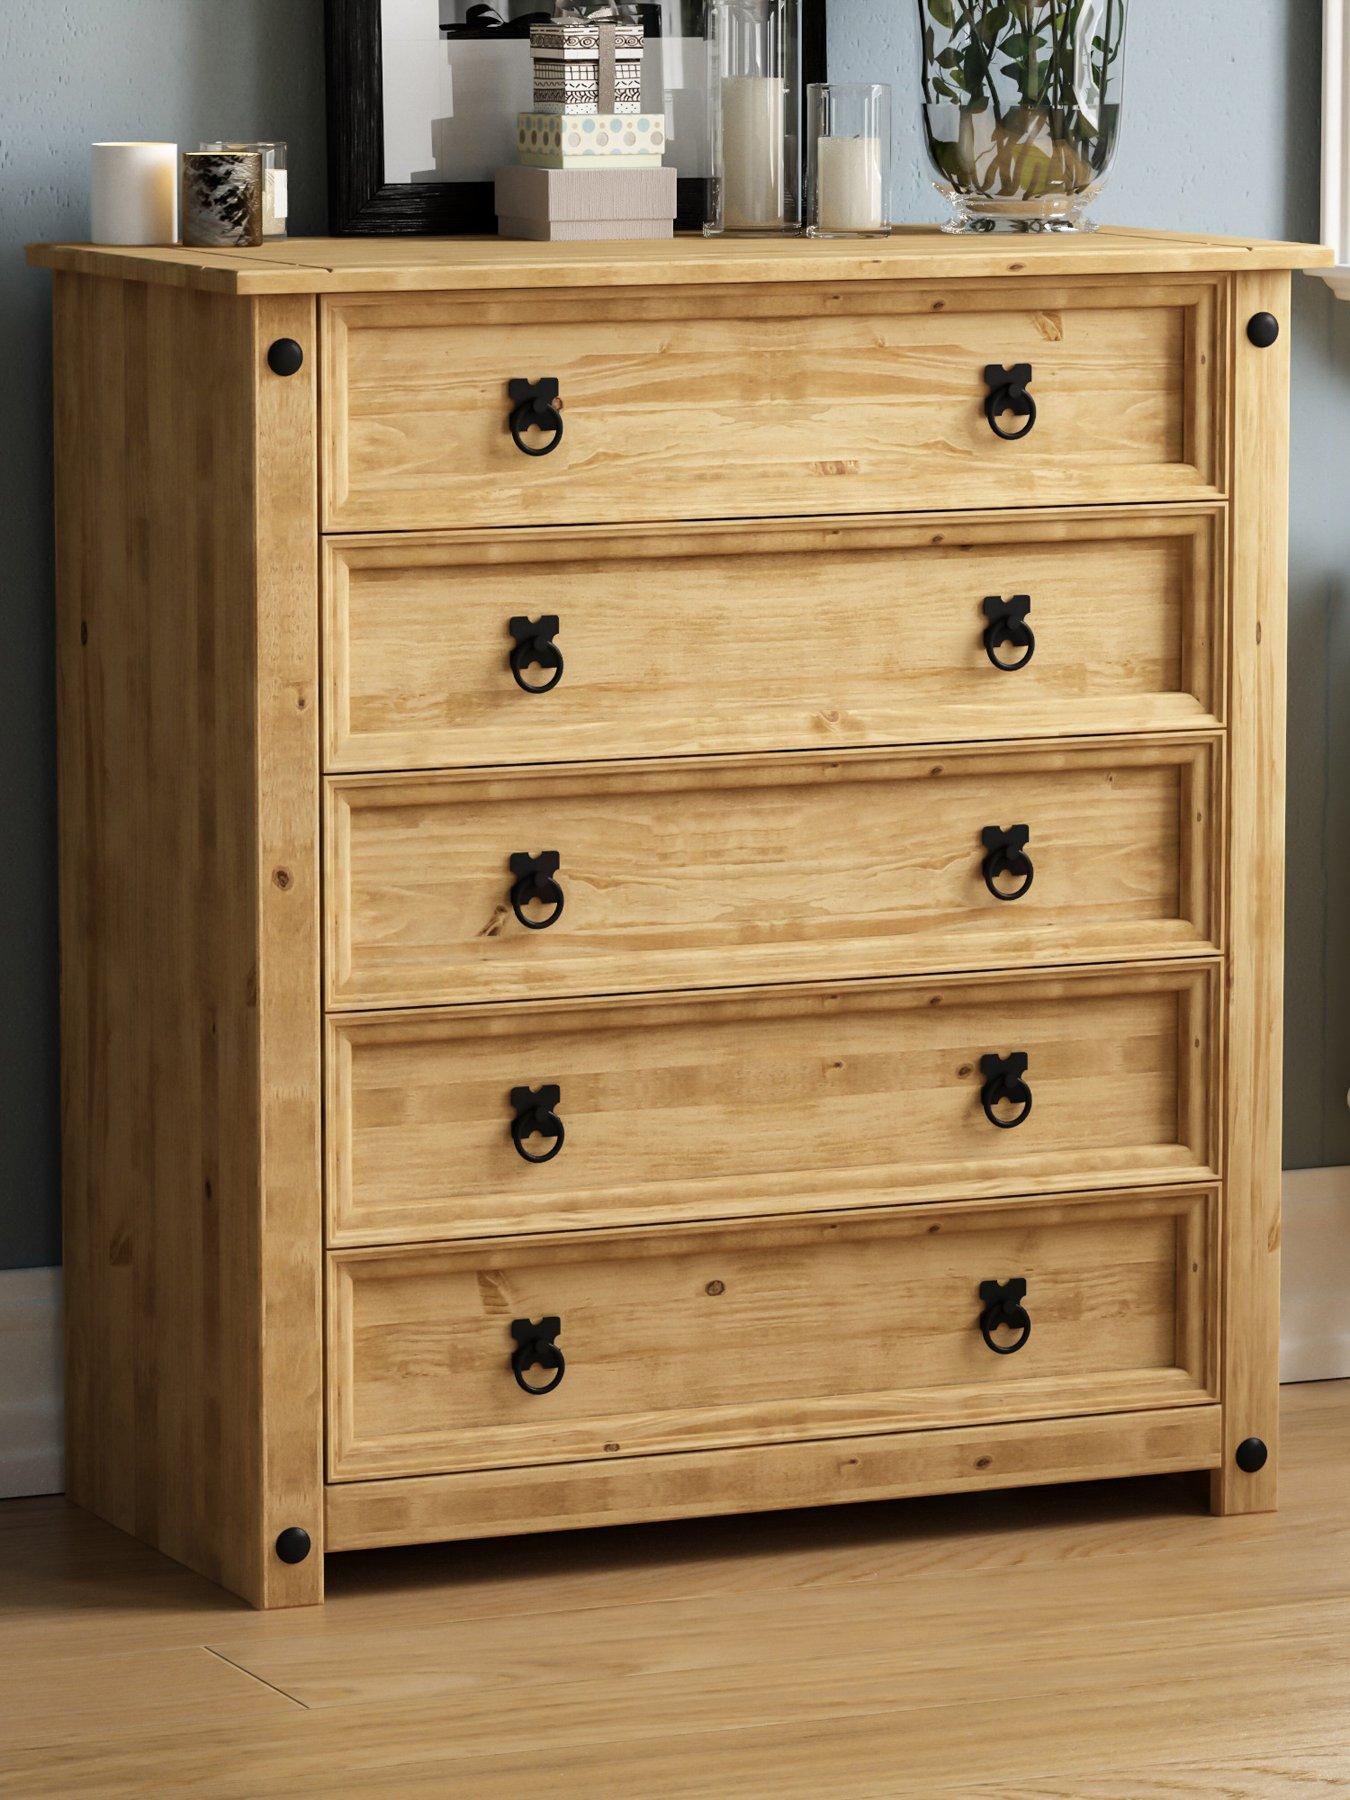 Rustic Solid Oak 5 Drawer Chest - Top drawer open view.